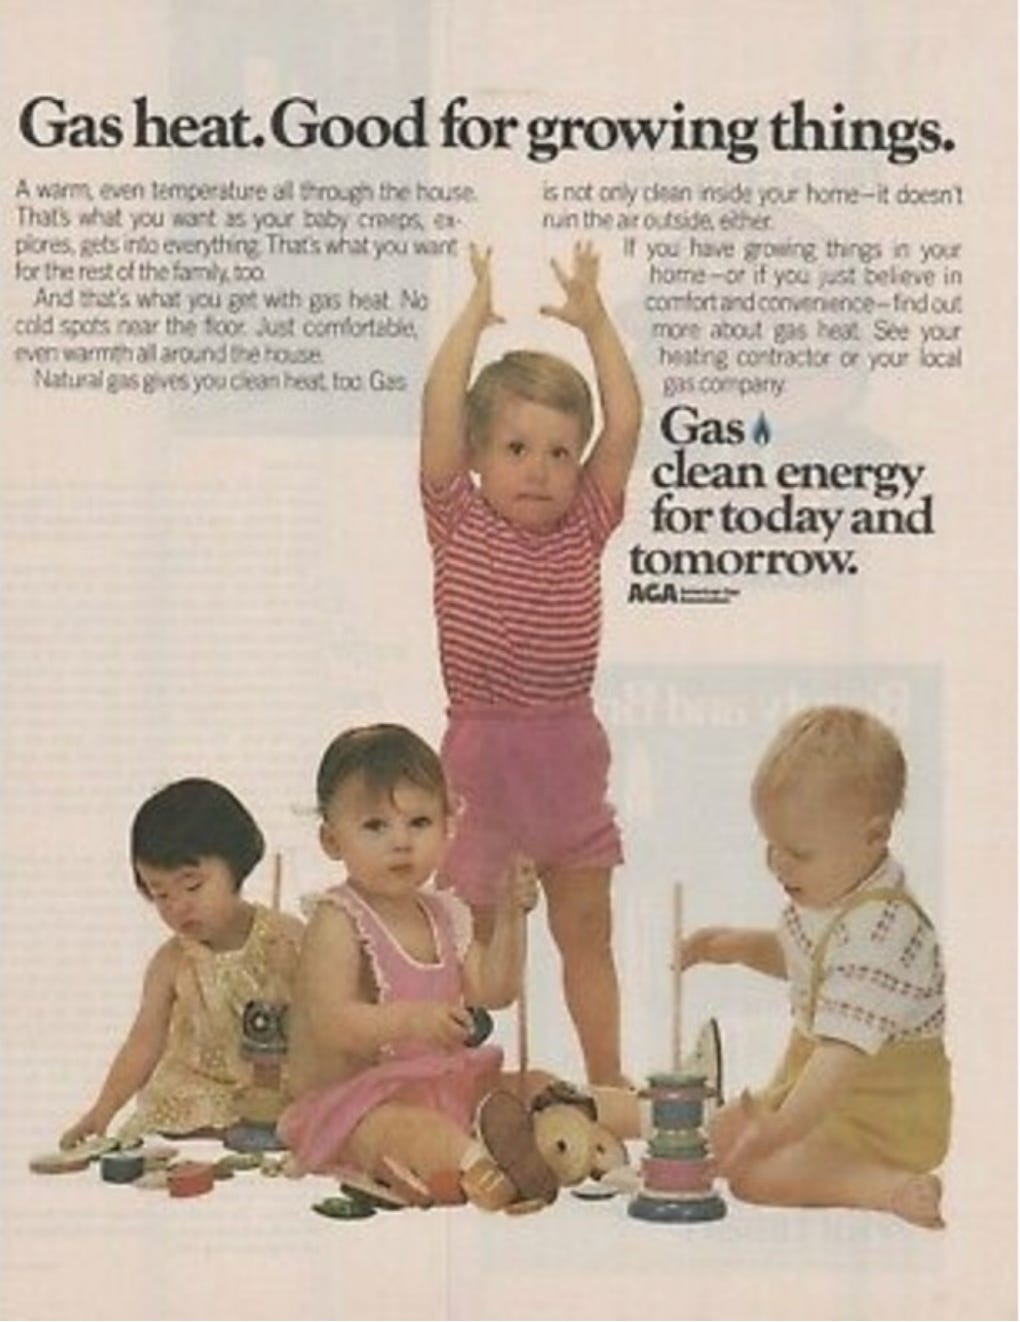 1972 American Gas Association ad: Gas heat. Good for growing things. Gas: clean energy for today and tomorrow. Toddlers playing